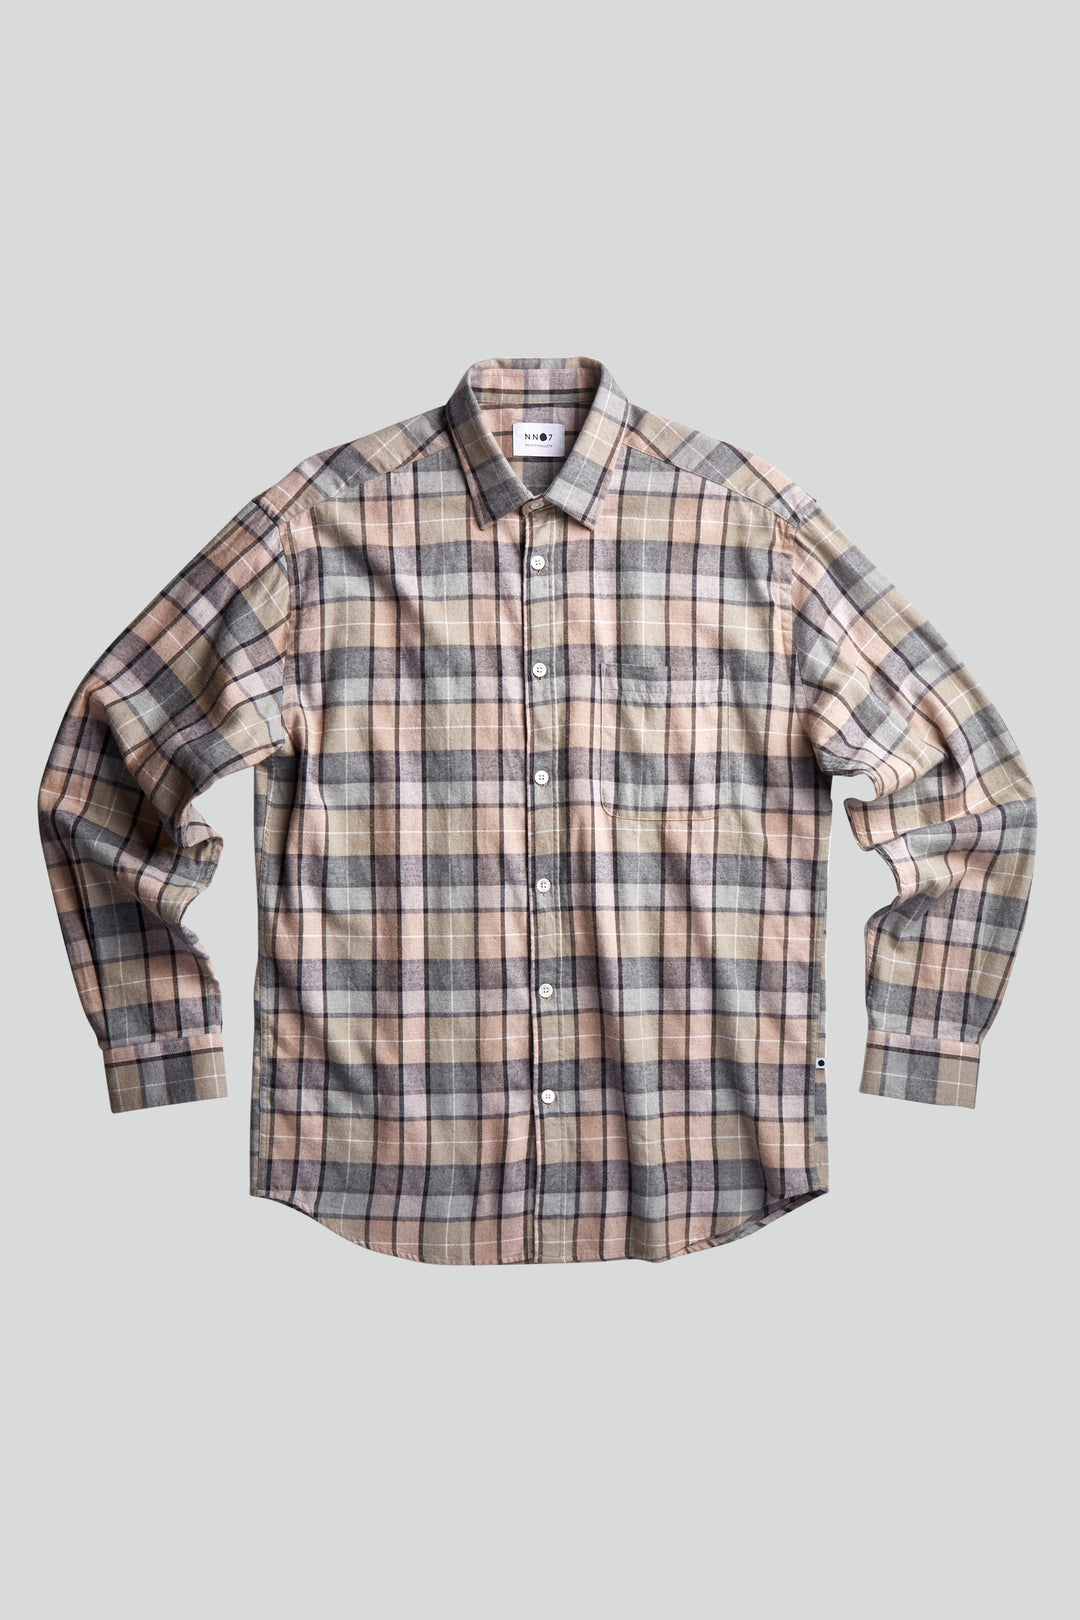 NN07 - Deon 5356 Cotton Shirt in Grey Check | Buster McGee